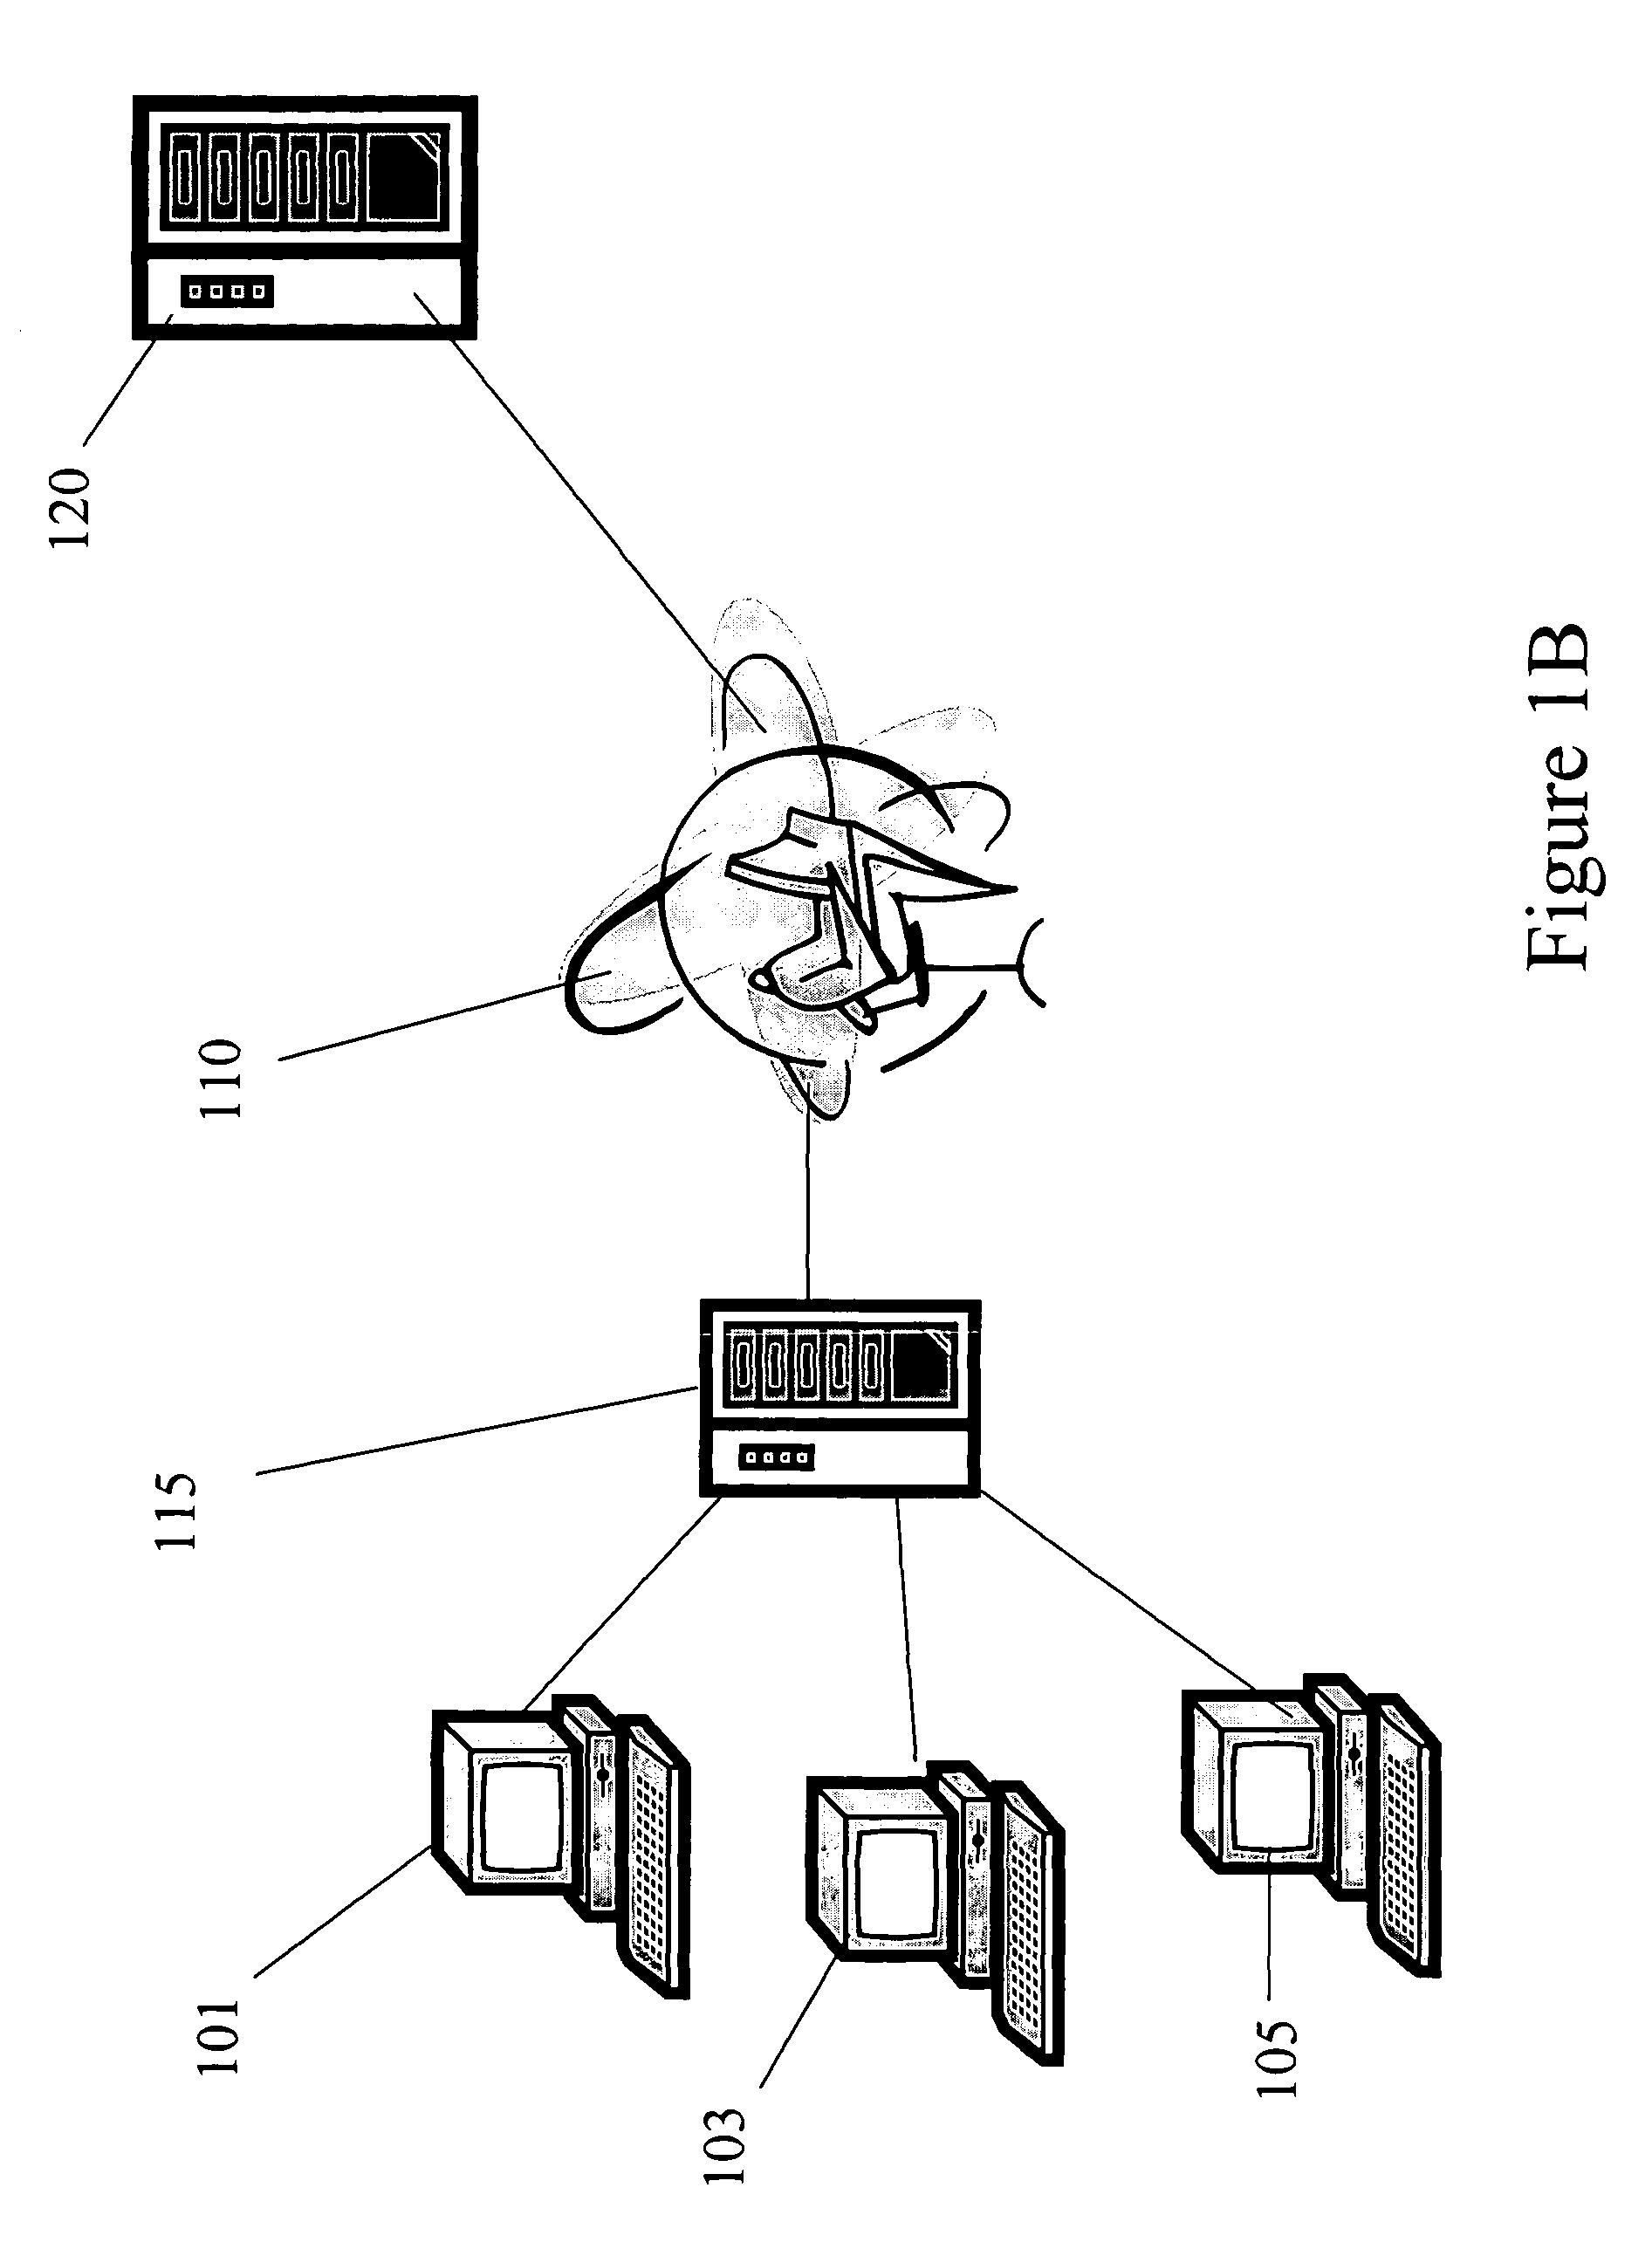 Systems and methods for providing software updates